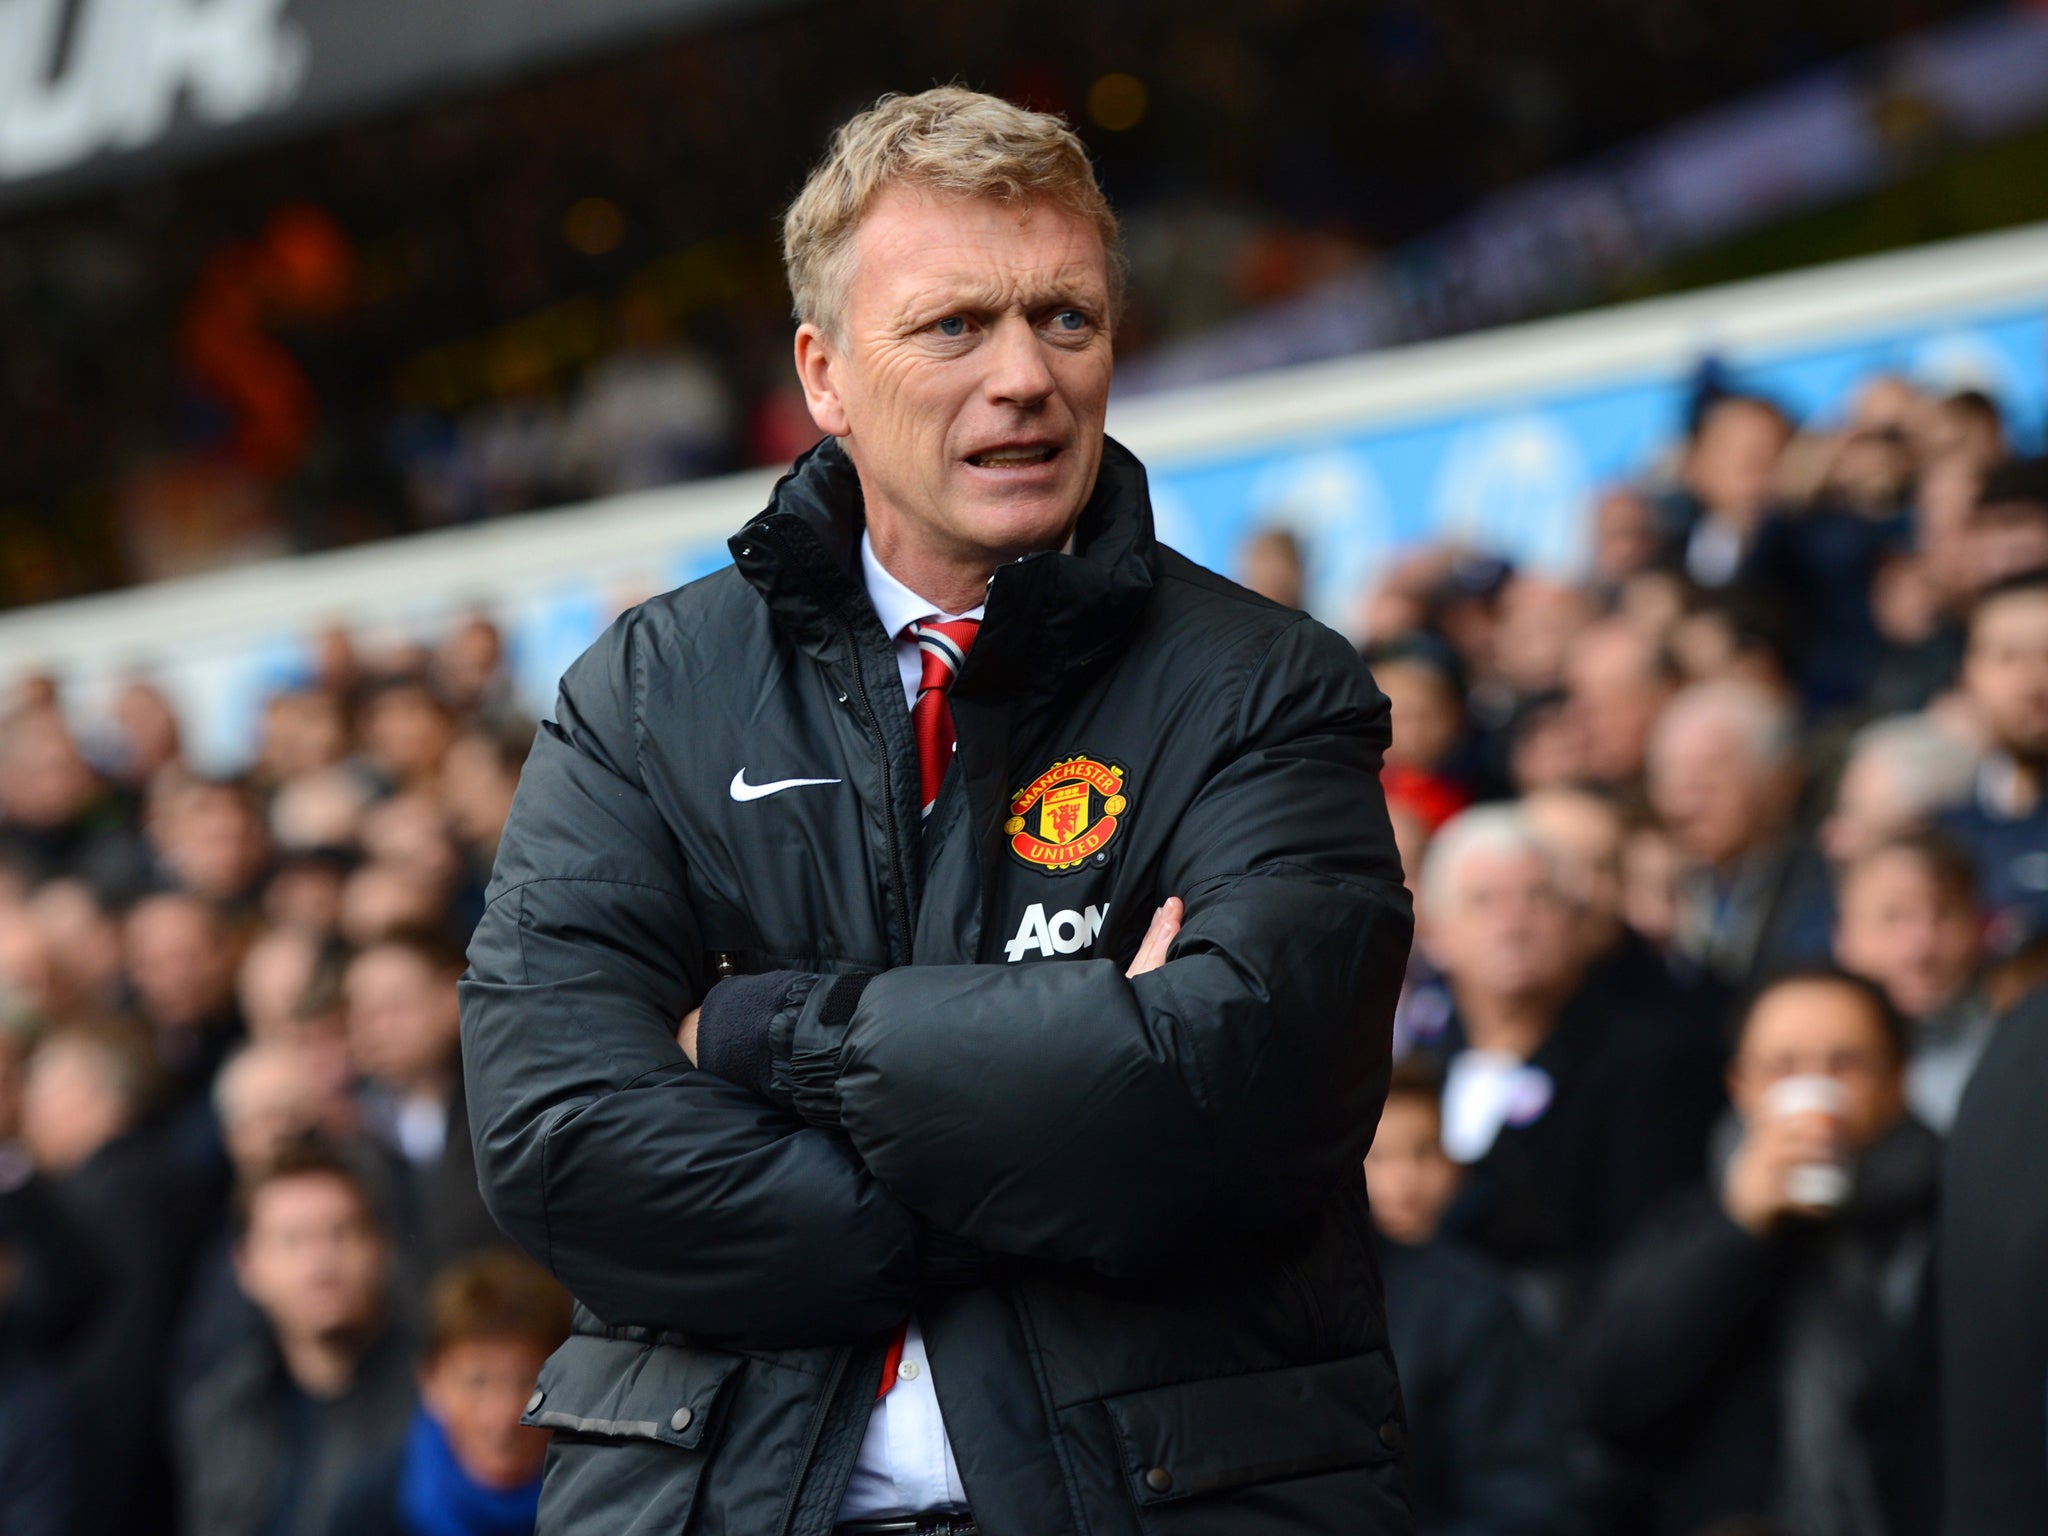 Manchester United manager David Moyes has praised his replacement at Everton Roberto Martinez